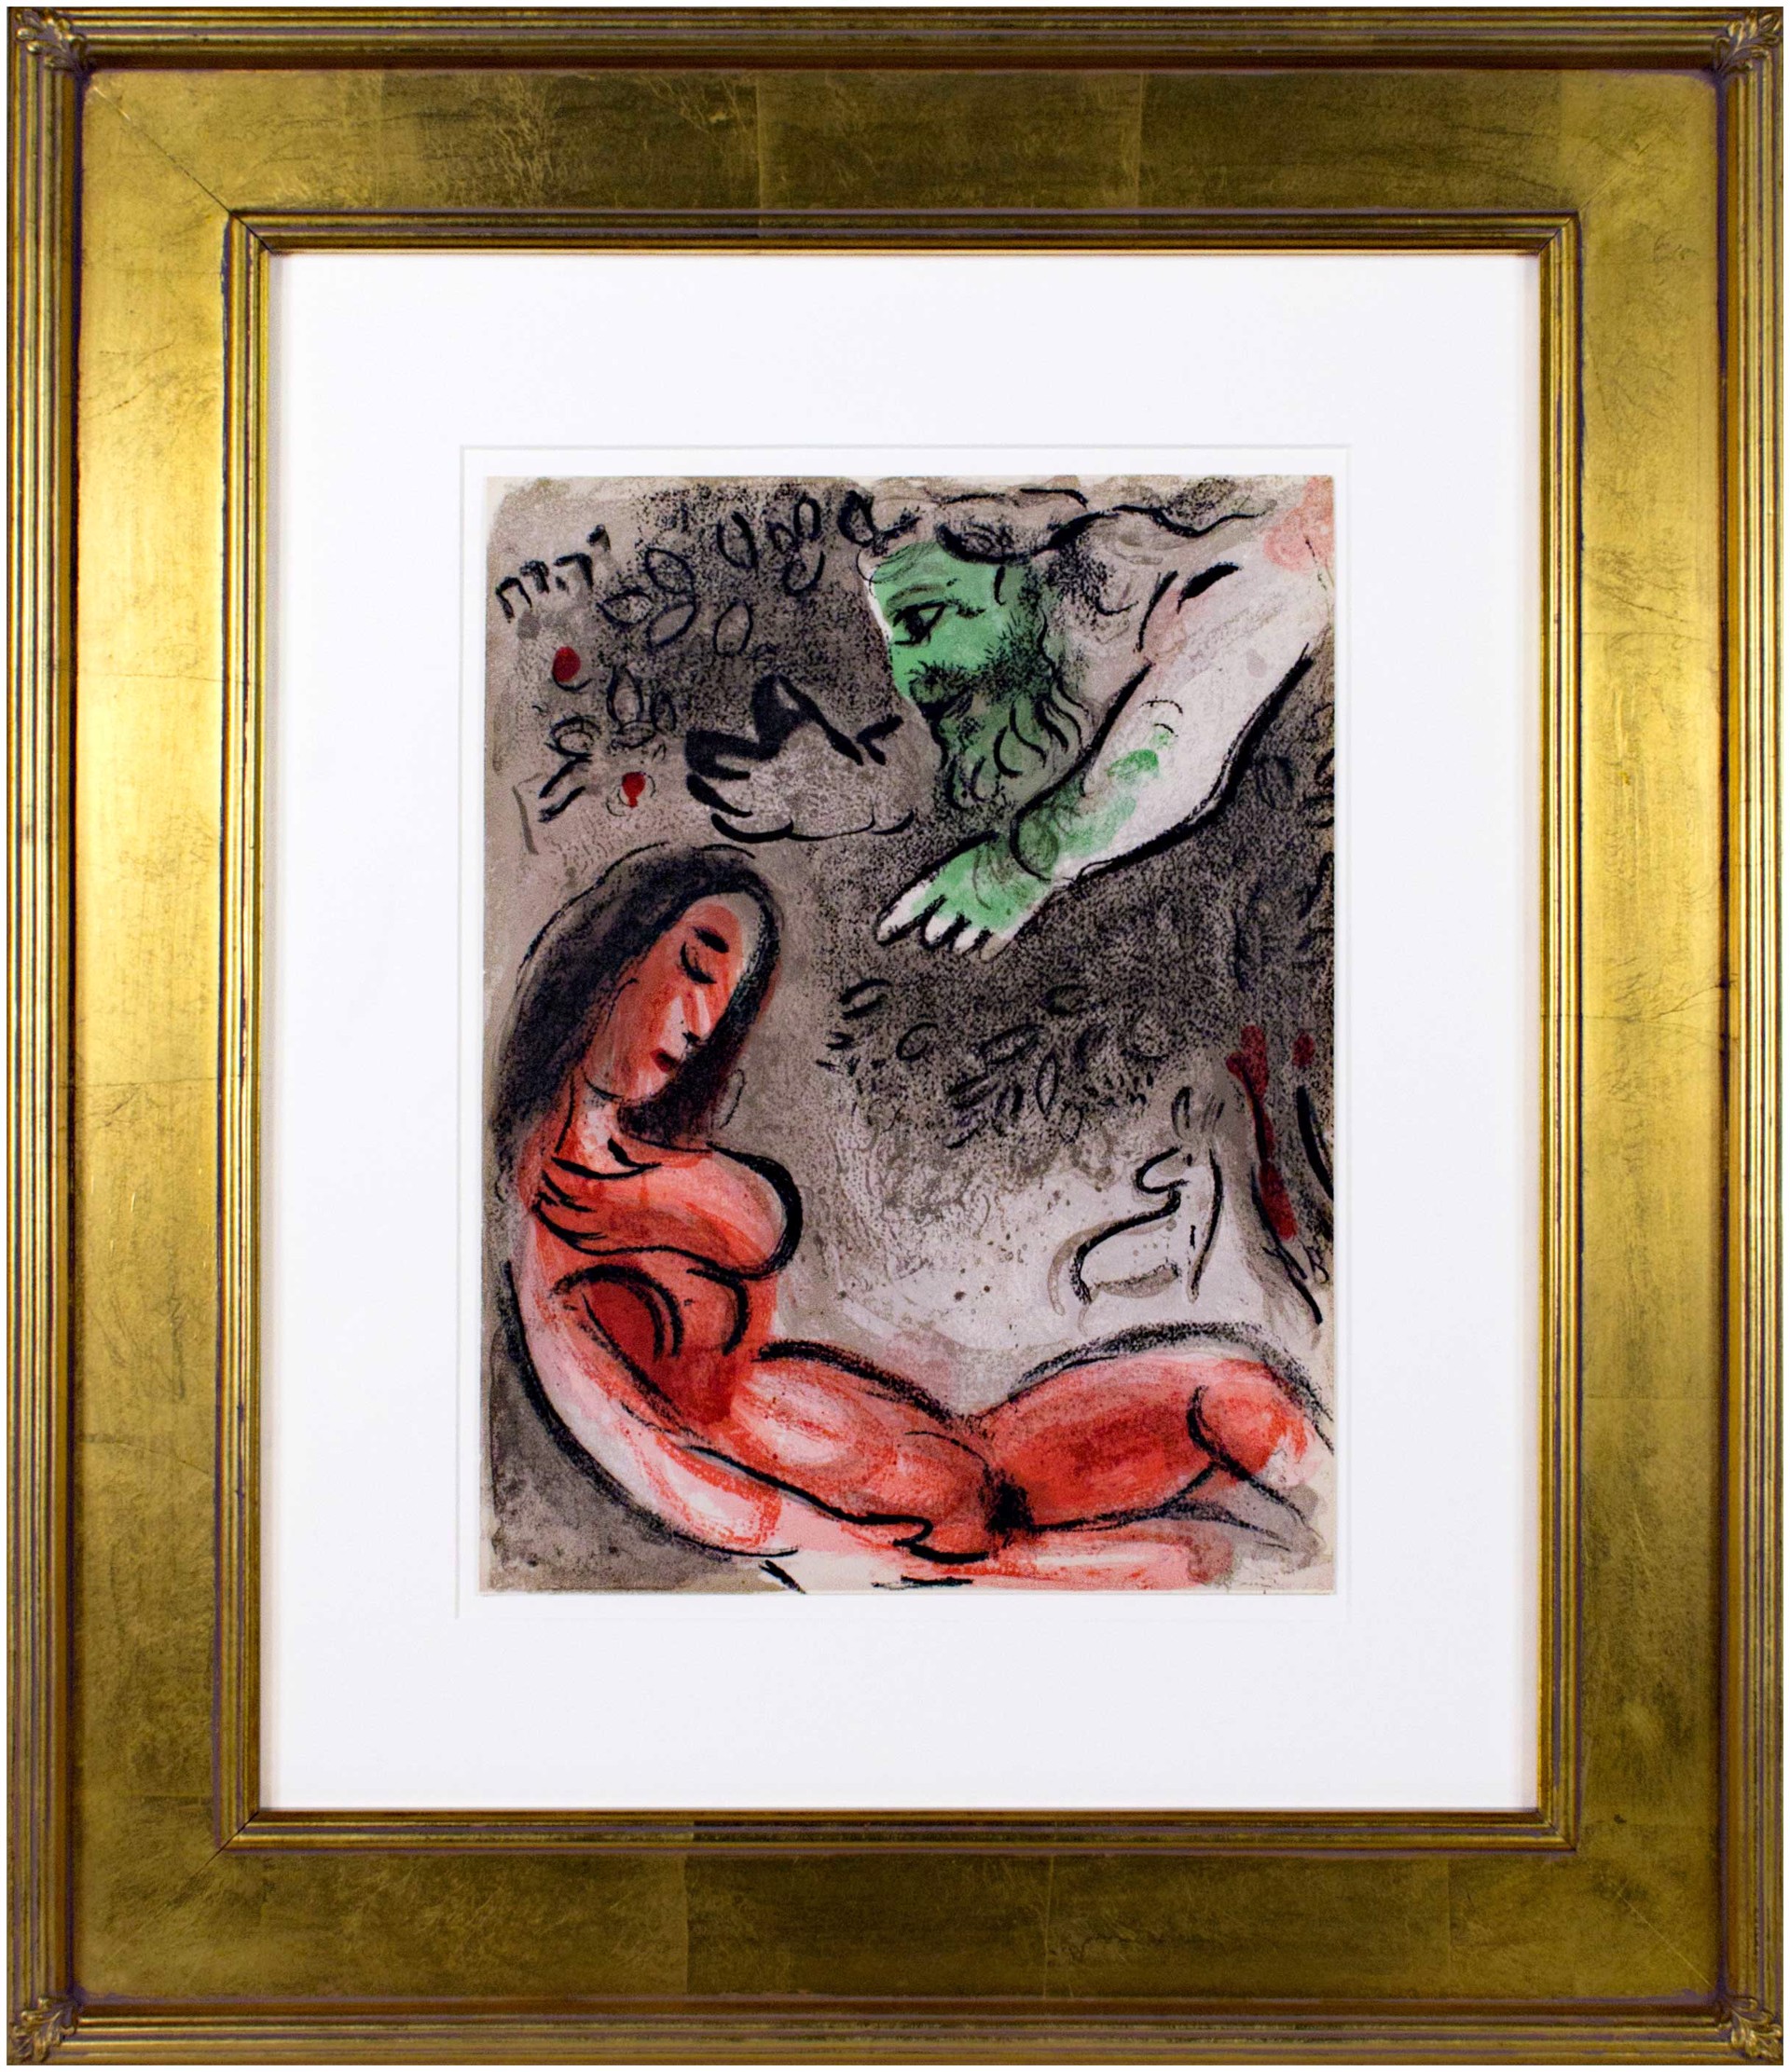 Eve Incurs God's Displeasure M236 by Marc Chagall